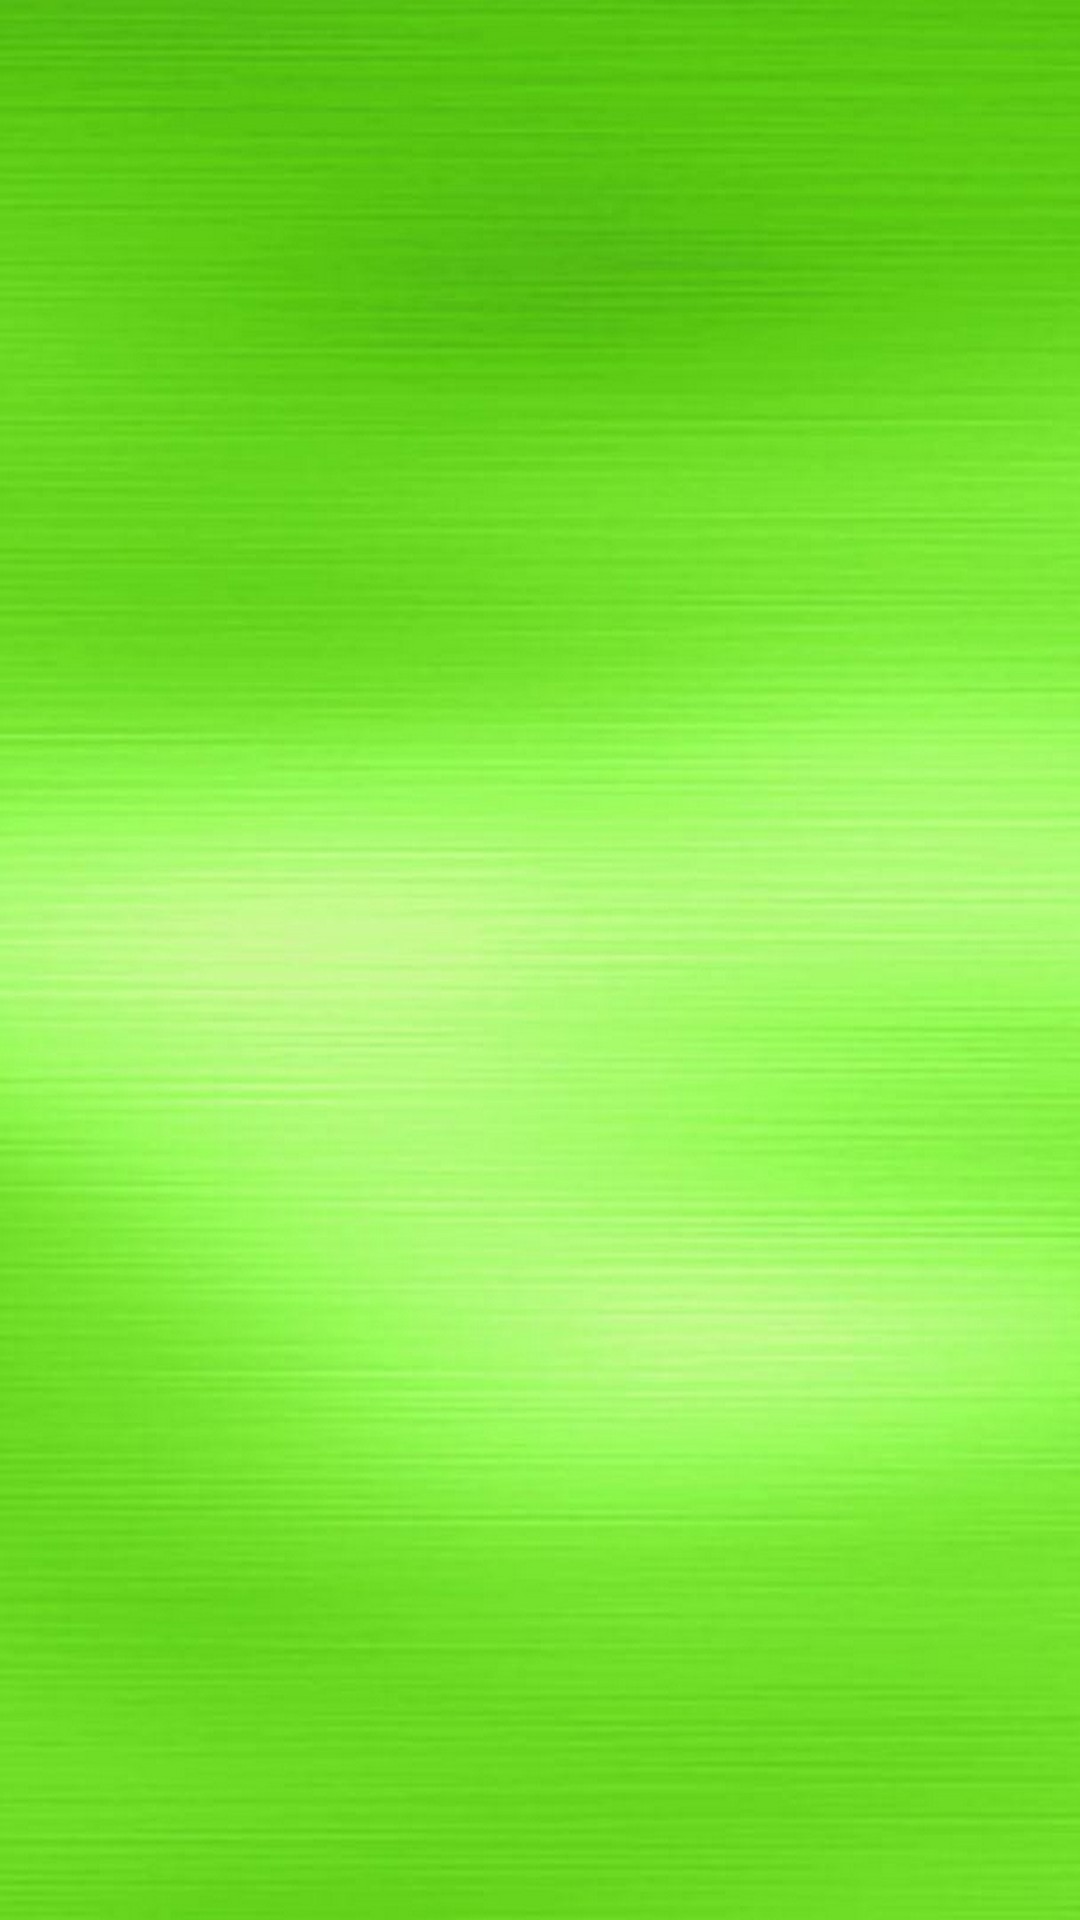 Android Wallpaper HD Light Green with image resolution 1080x1920 pixel. You can make this wallpaper for your Android backgrounds, Tablet, Smartphones Screensavers and Mobile Phone Lock Screen